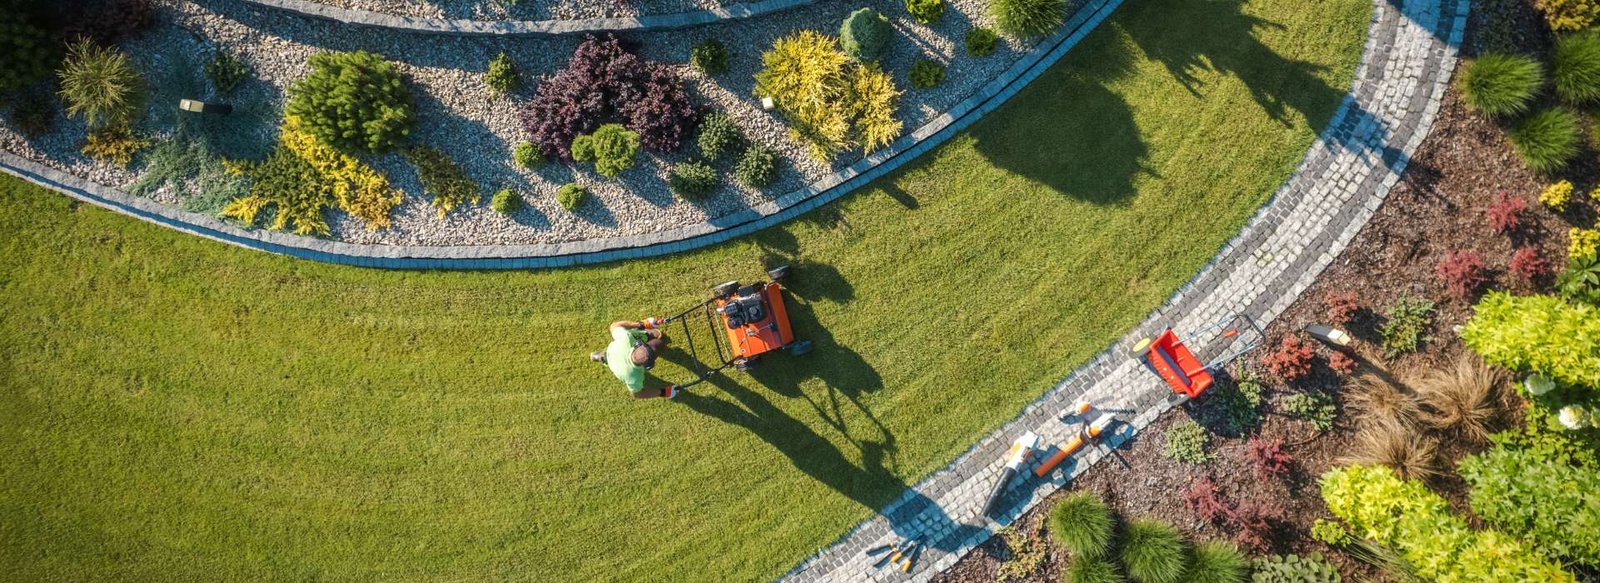 Detailed view of lawn aeration techniques by Urban Landscape & Construction.